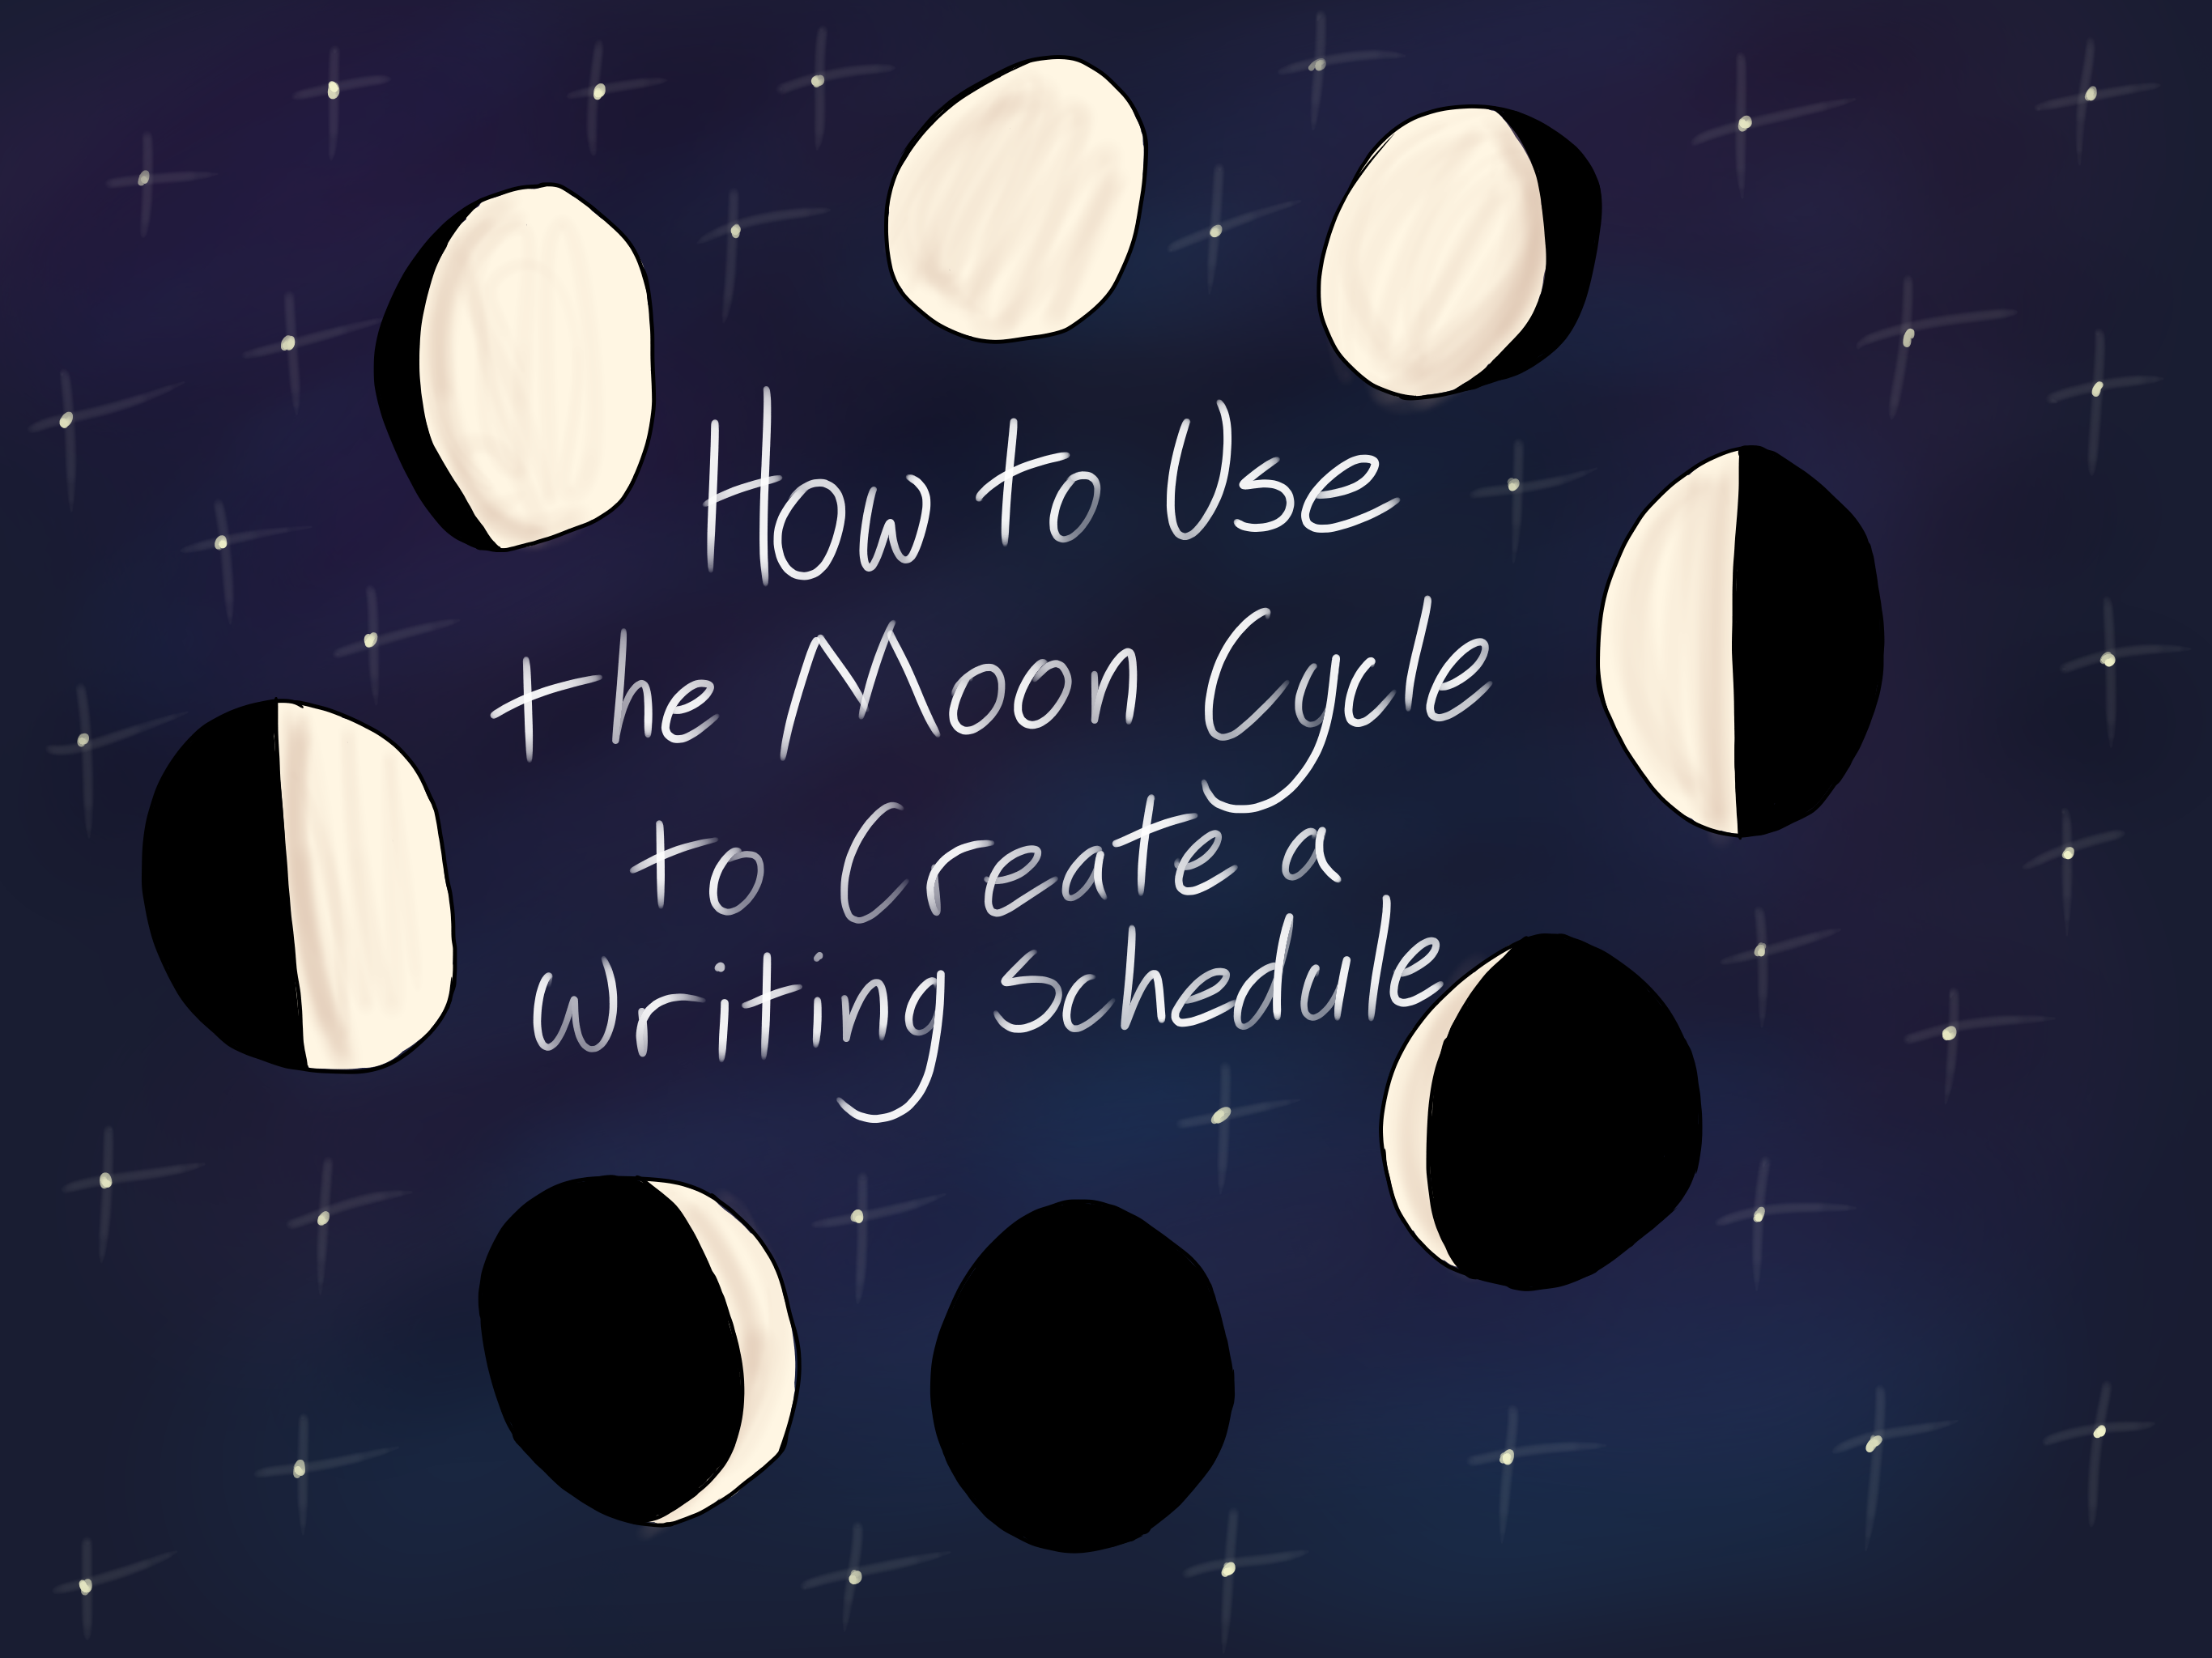 How to Use the Moon Cycle to Create a Writing Schedule (art by @peachyartist (that's me!))